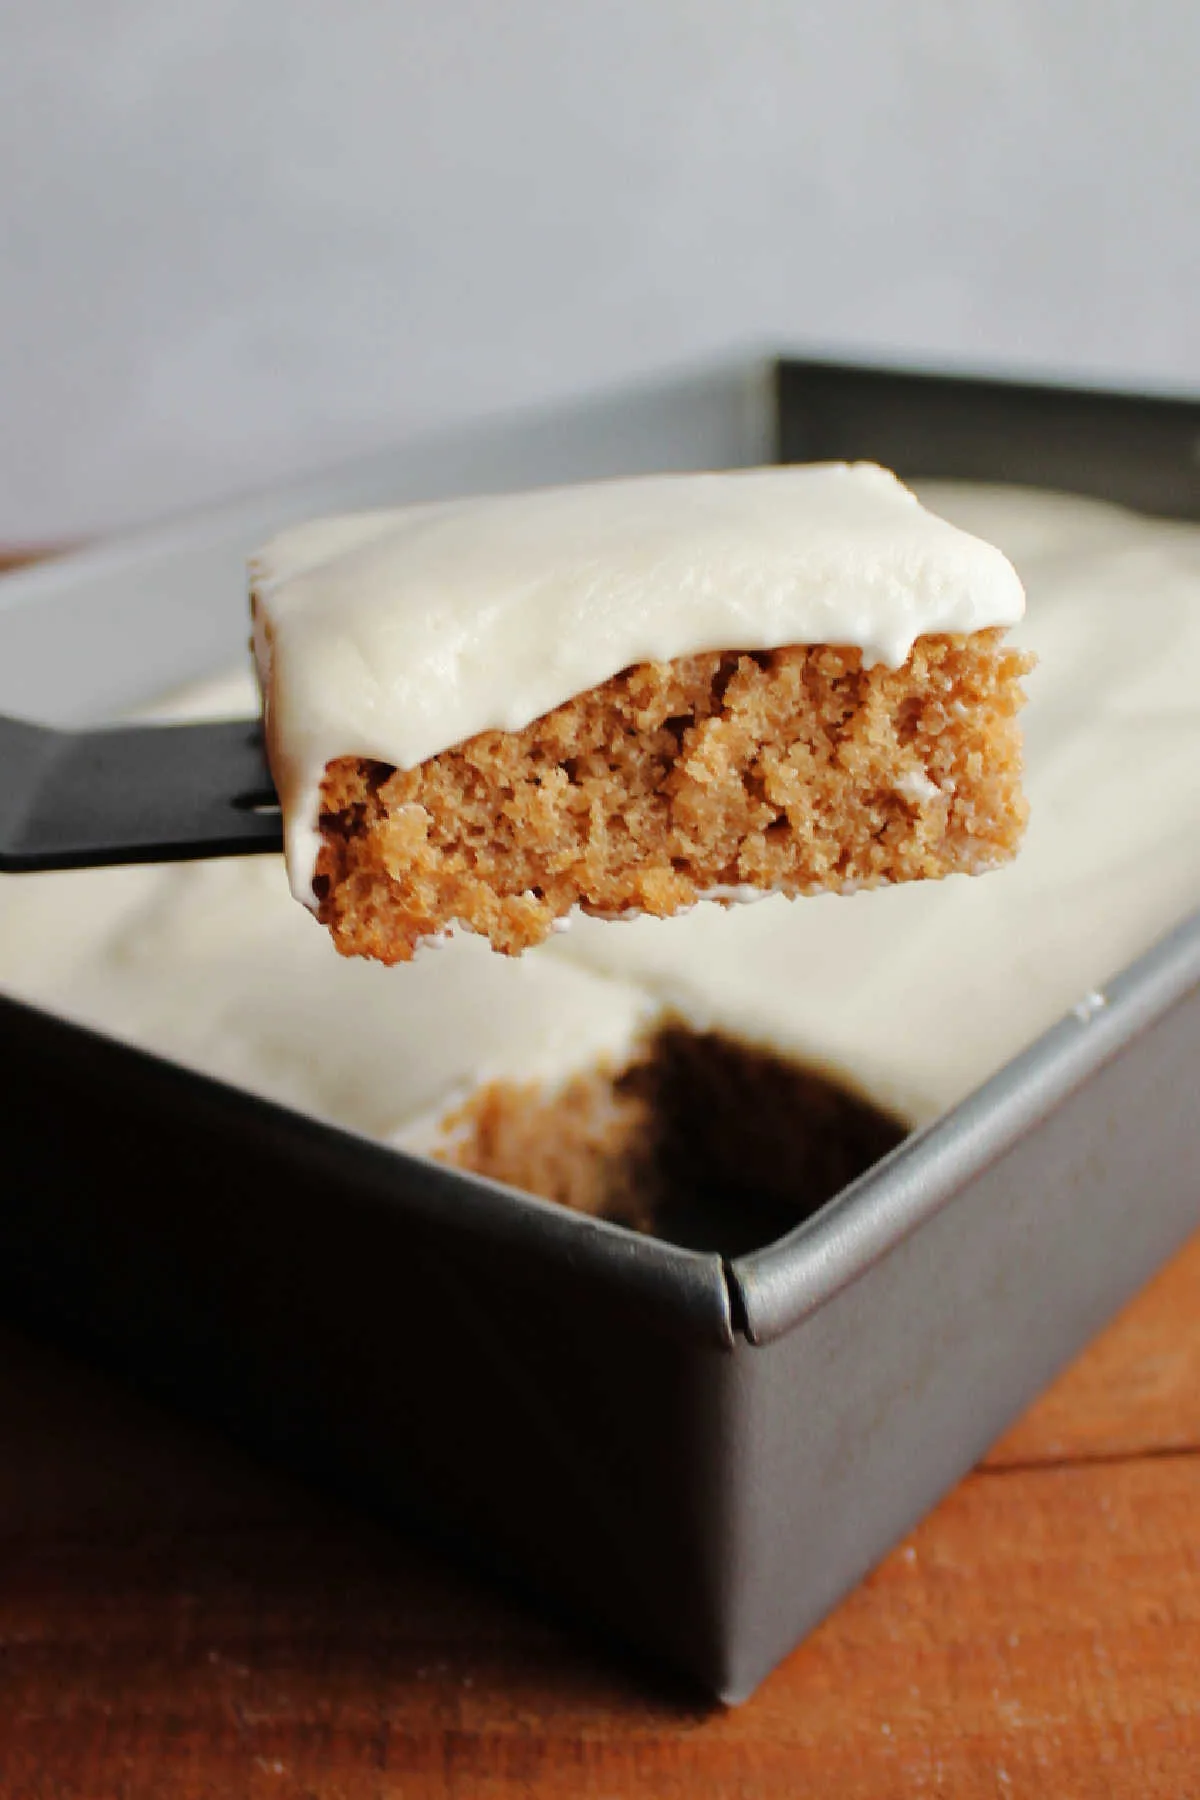 Lifting piece of apple bars topped with sour cream frosting out of pan.